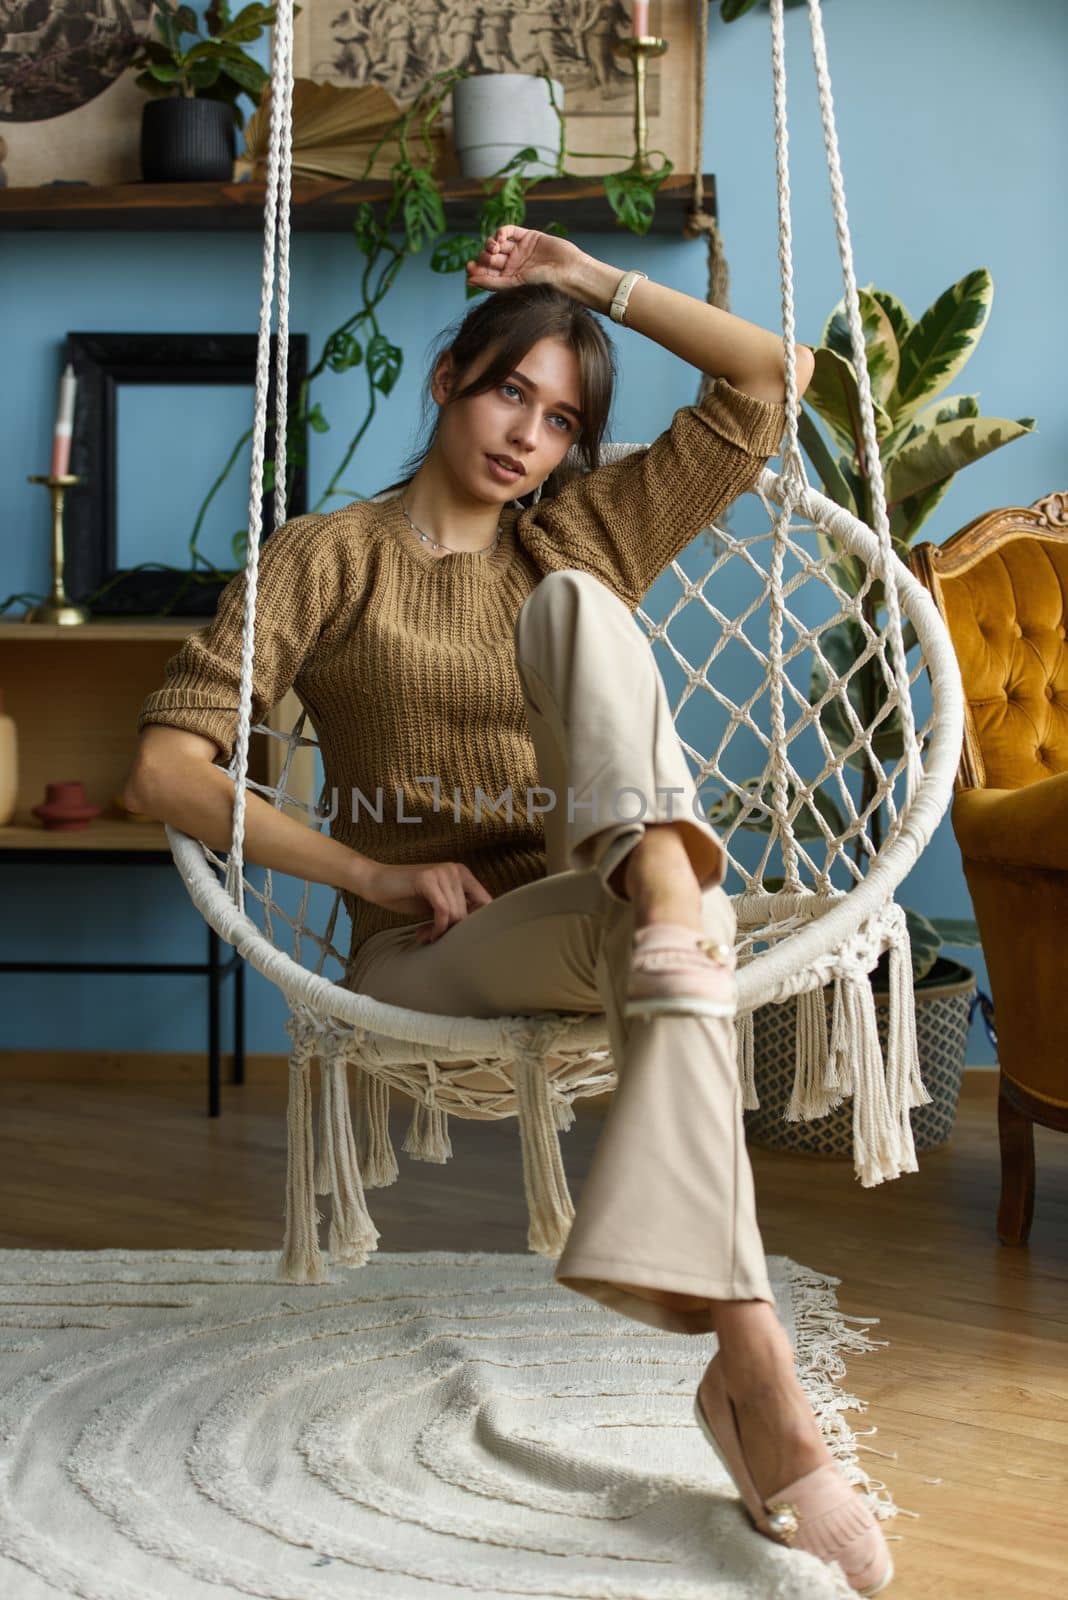 Young attractive woman chilling at home in comfortable hanging chair. beautiful slender girl in beige pants and olive sweater posing while sitting in a swing chair